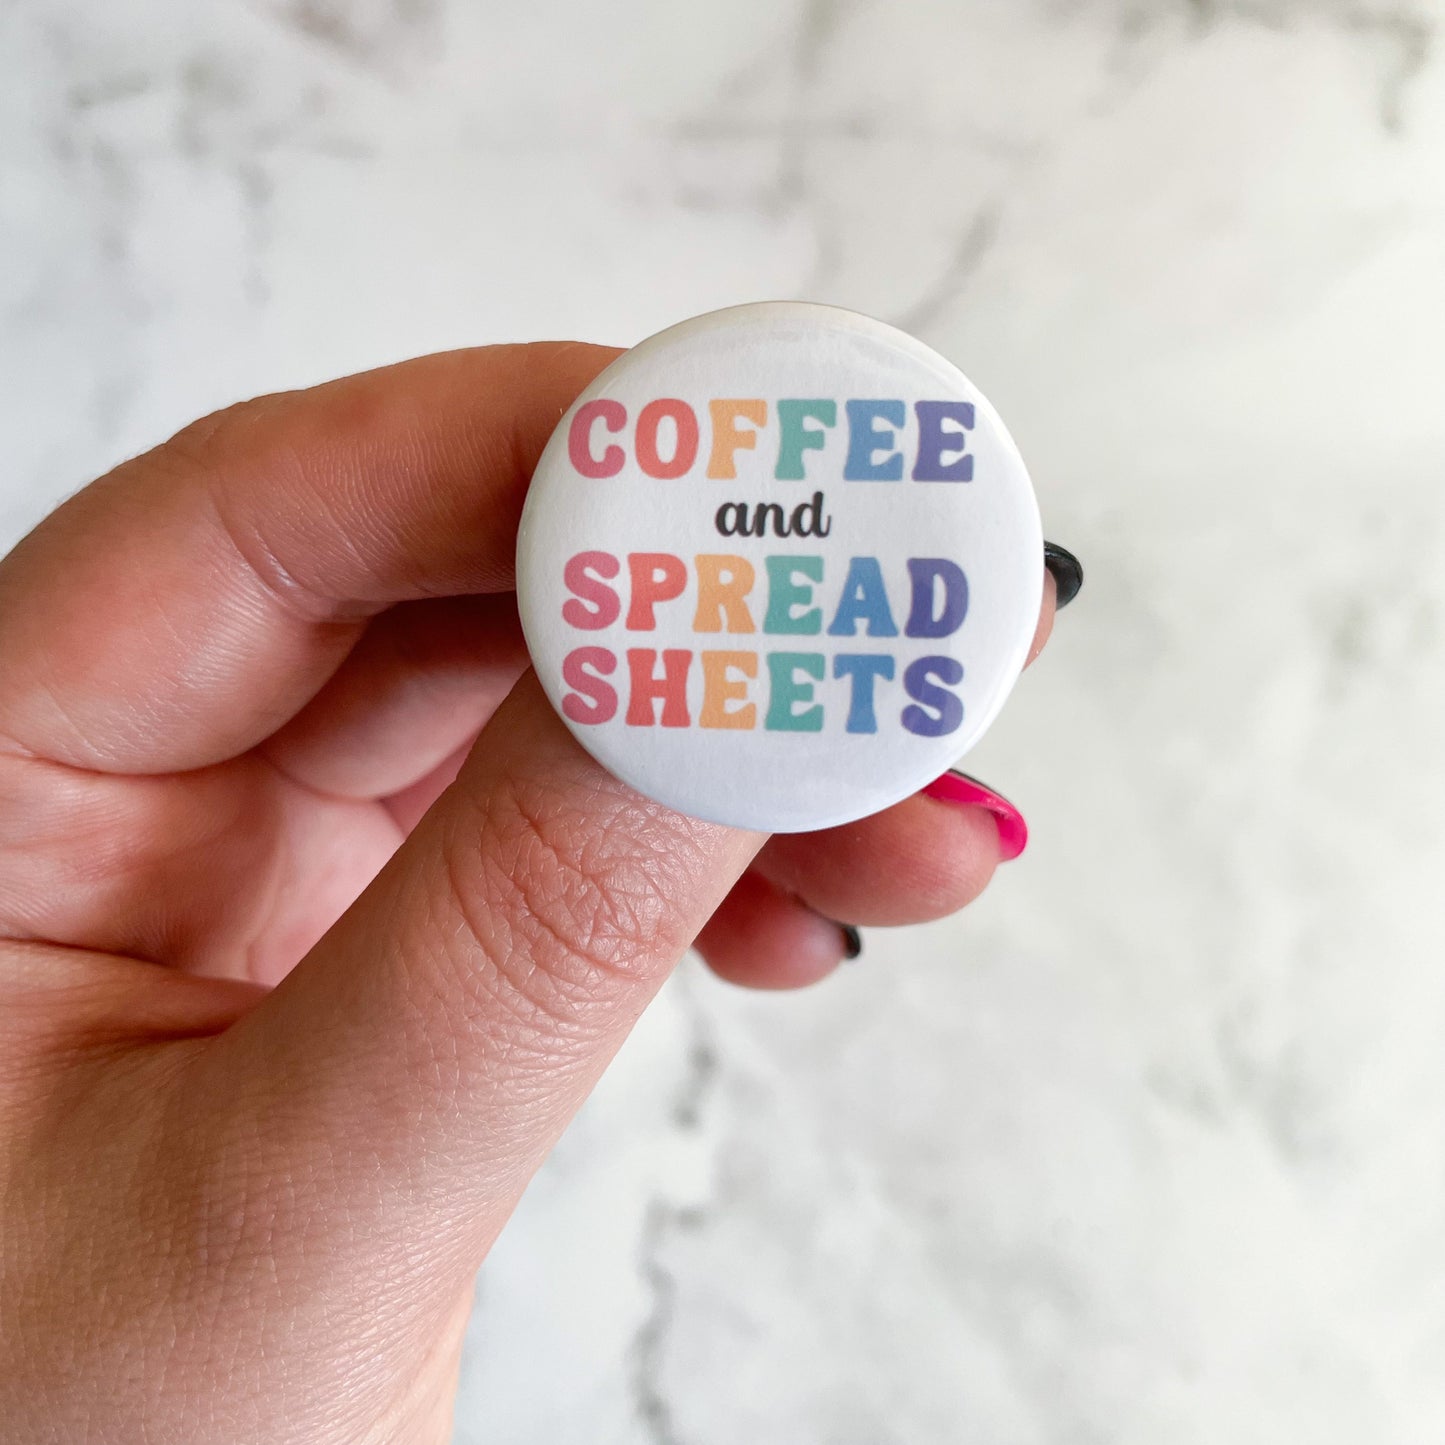 Coffee and Spreadsheets Excel Button / Badge (Buy 4 Get 1 FREE)